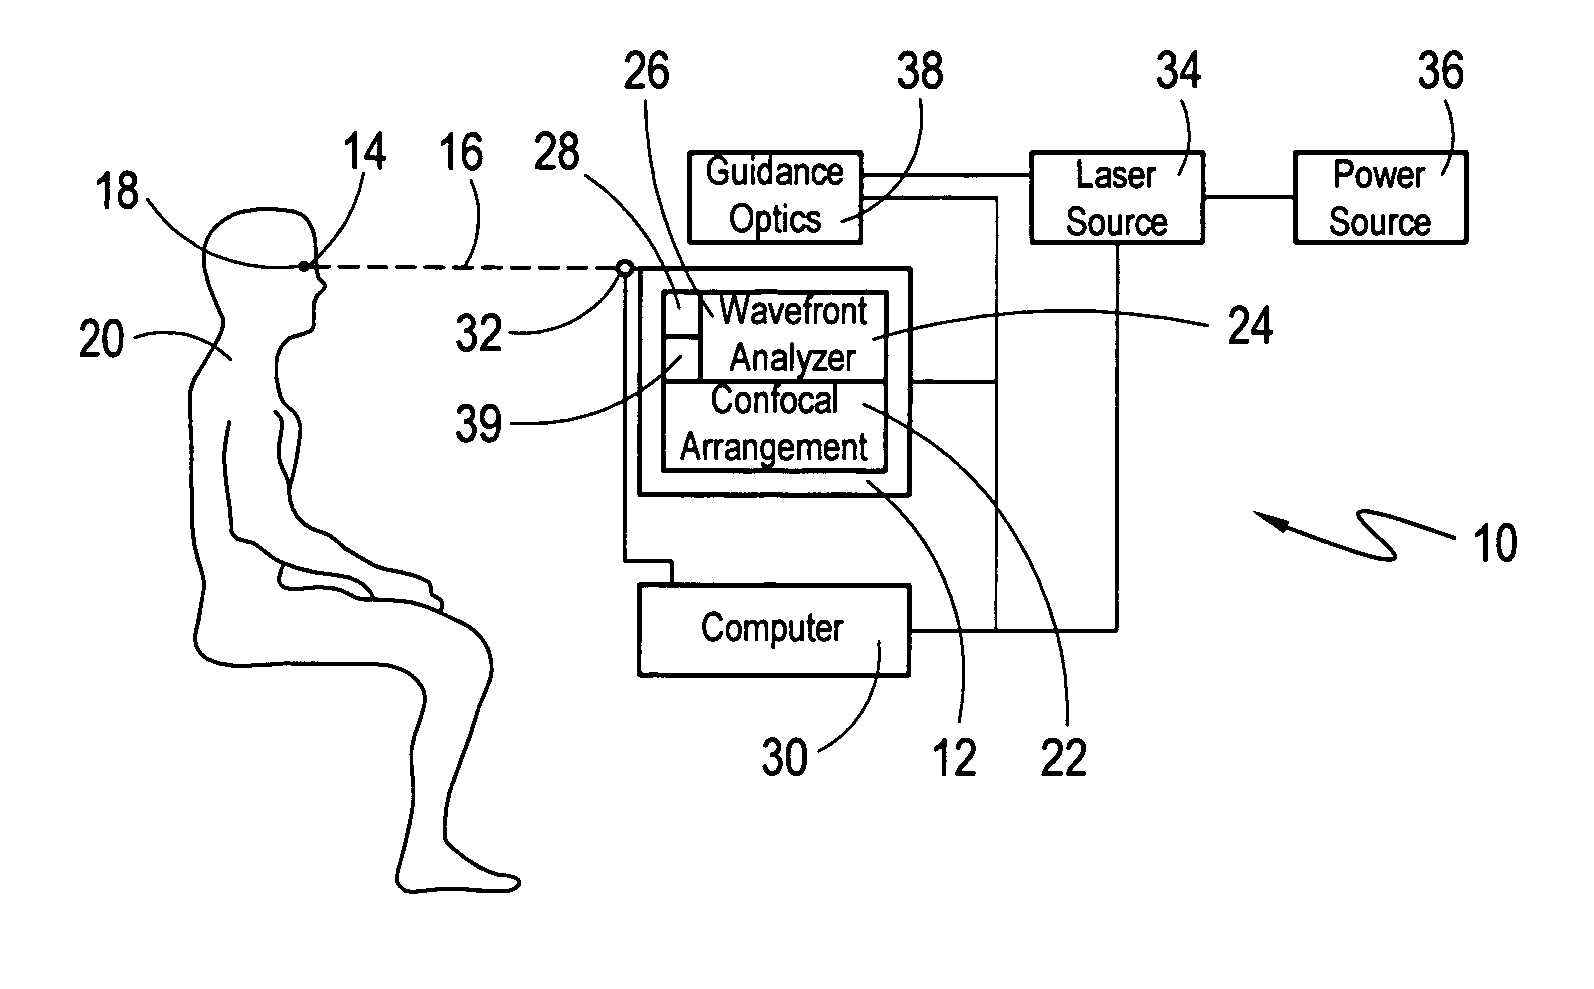 Eye position control monitor for laser vision correction